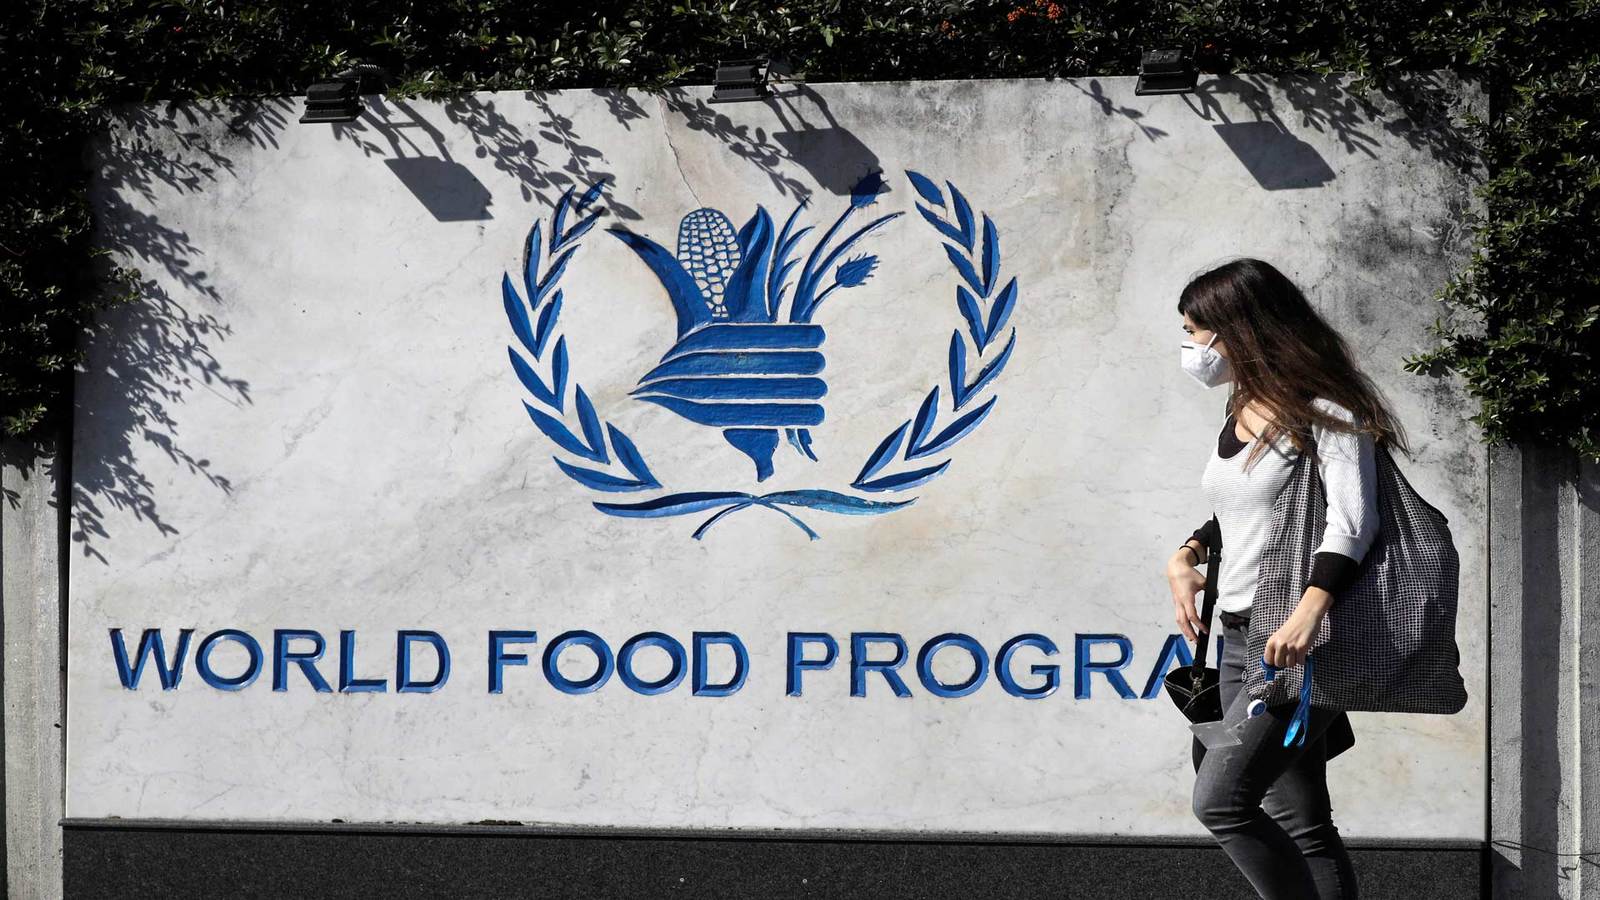 World Food Programme wins 2020 Nobel peace prize for its efforts to combat hunger, improving peace conditions